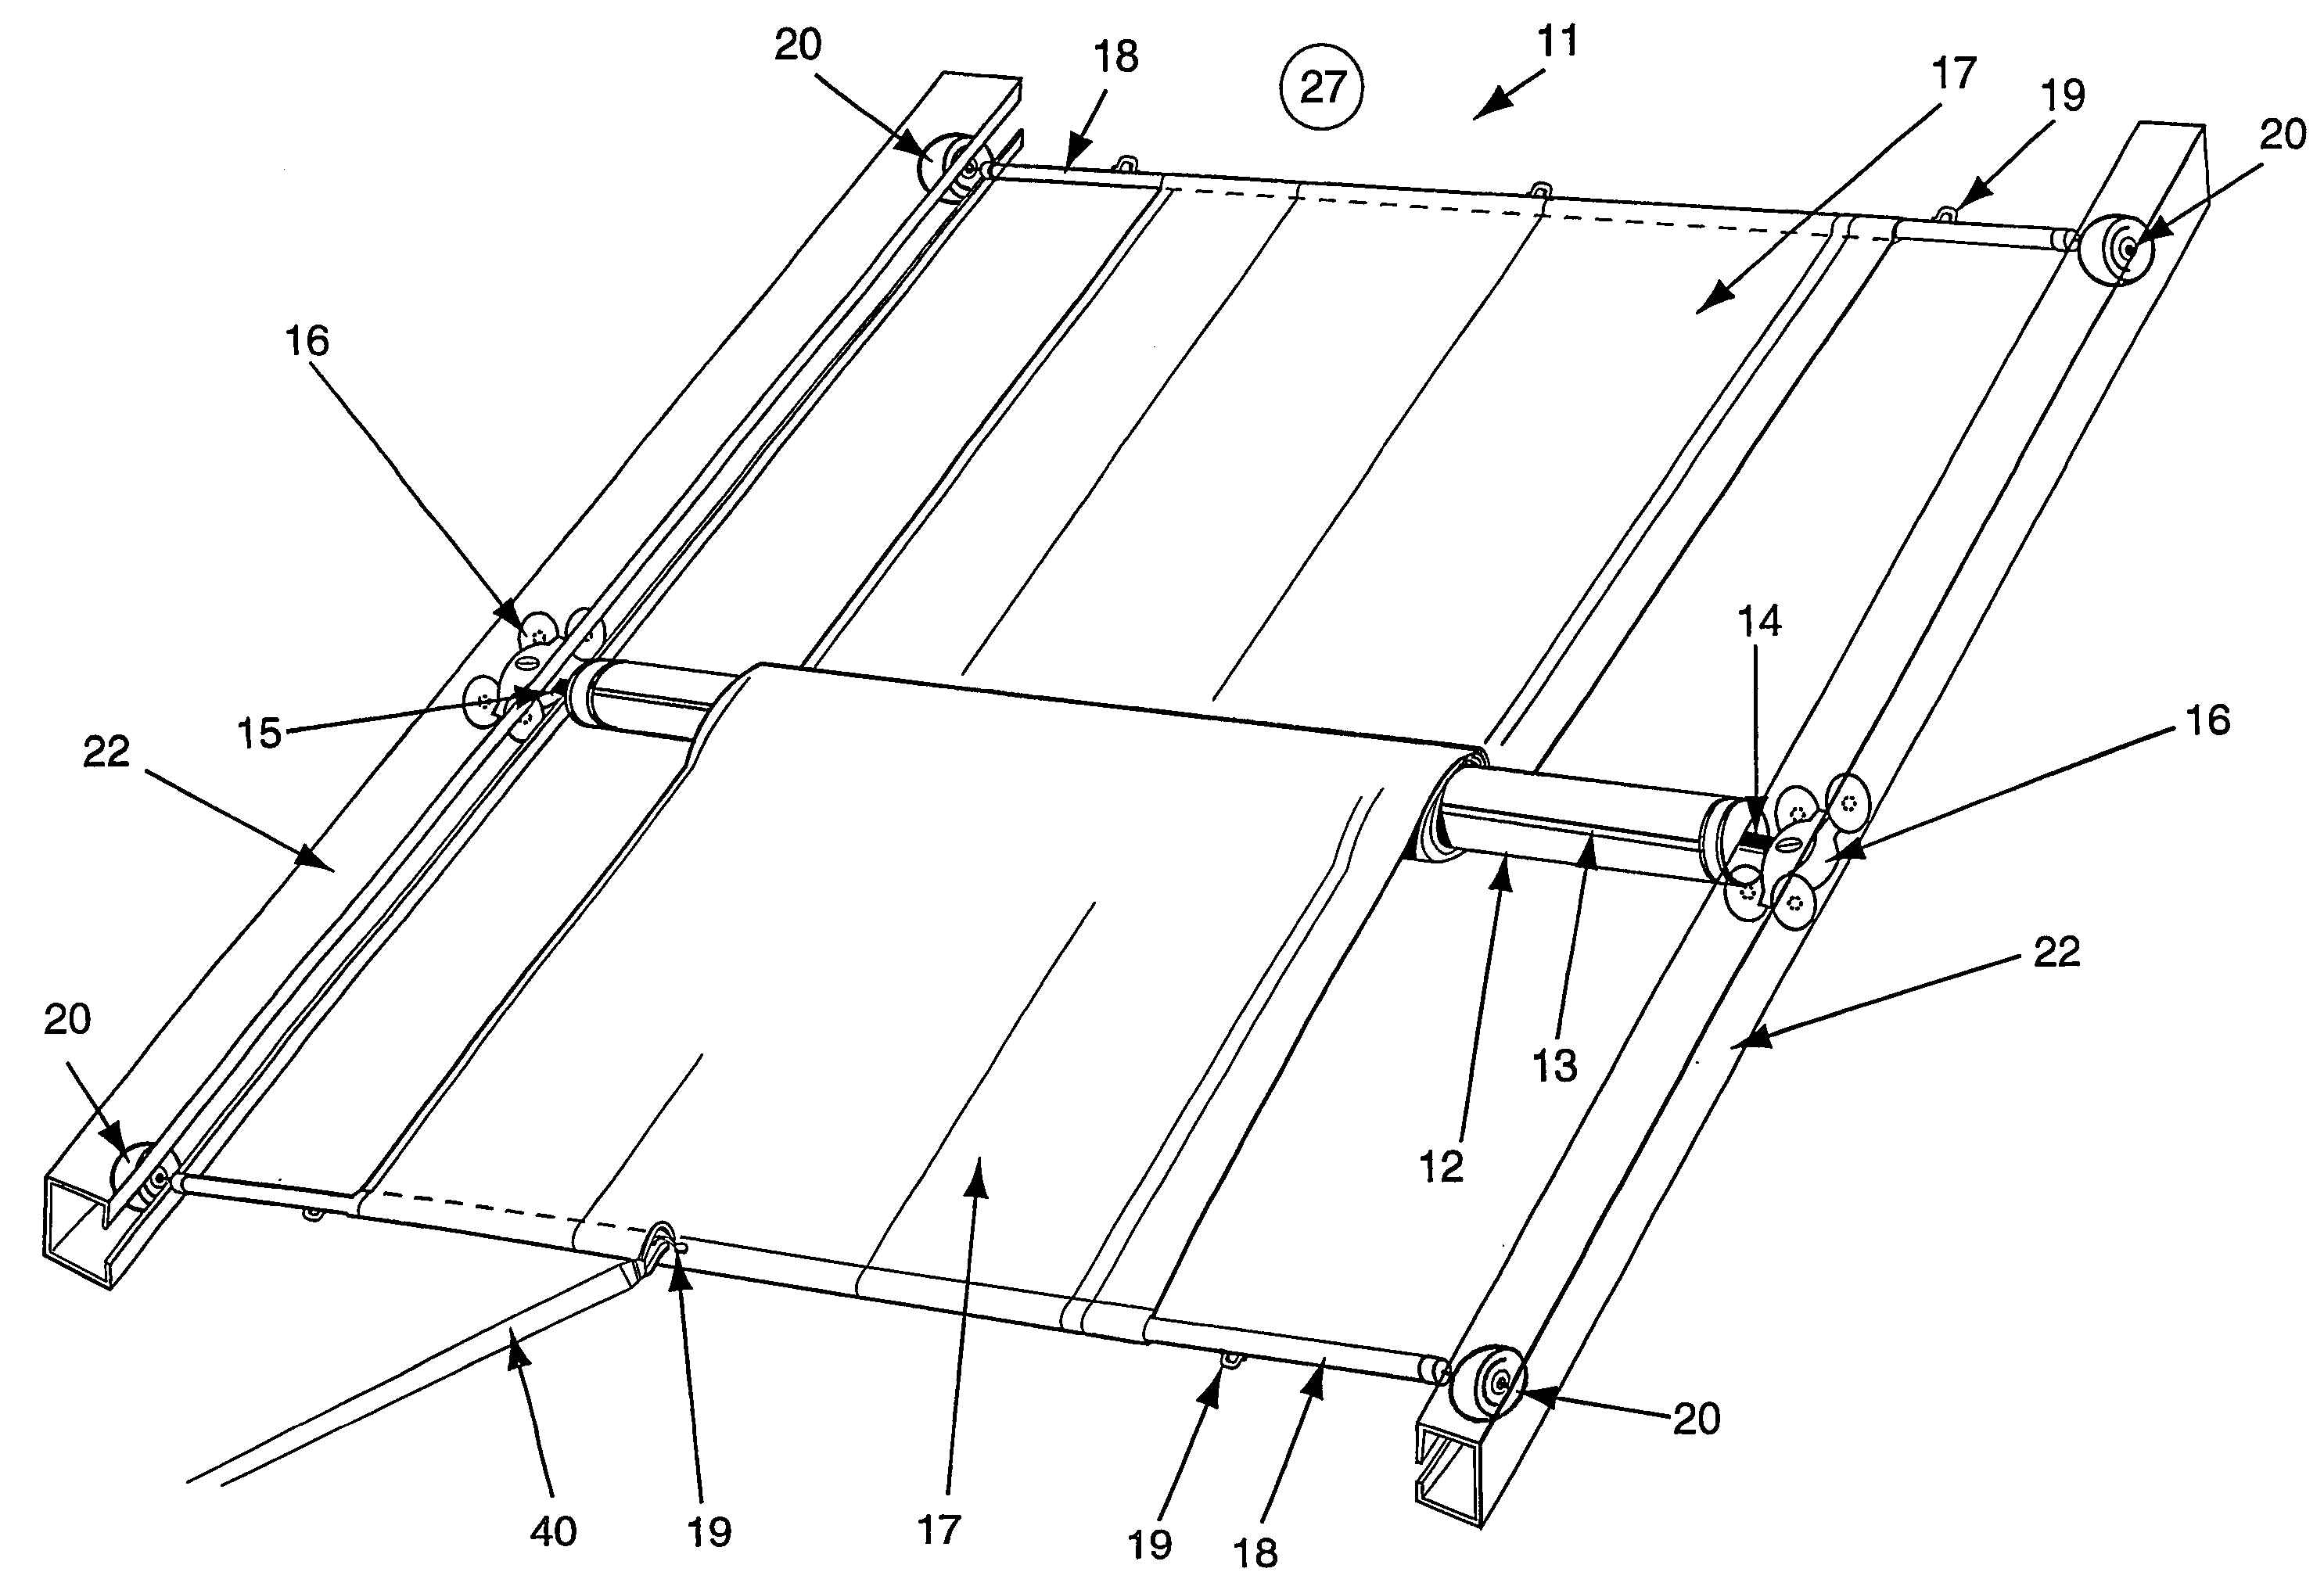 Retractable self rolling blind, awning or cover apparatus